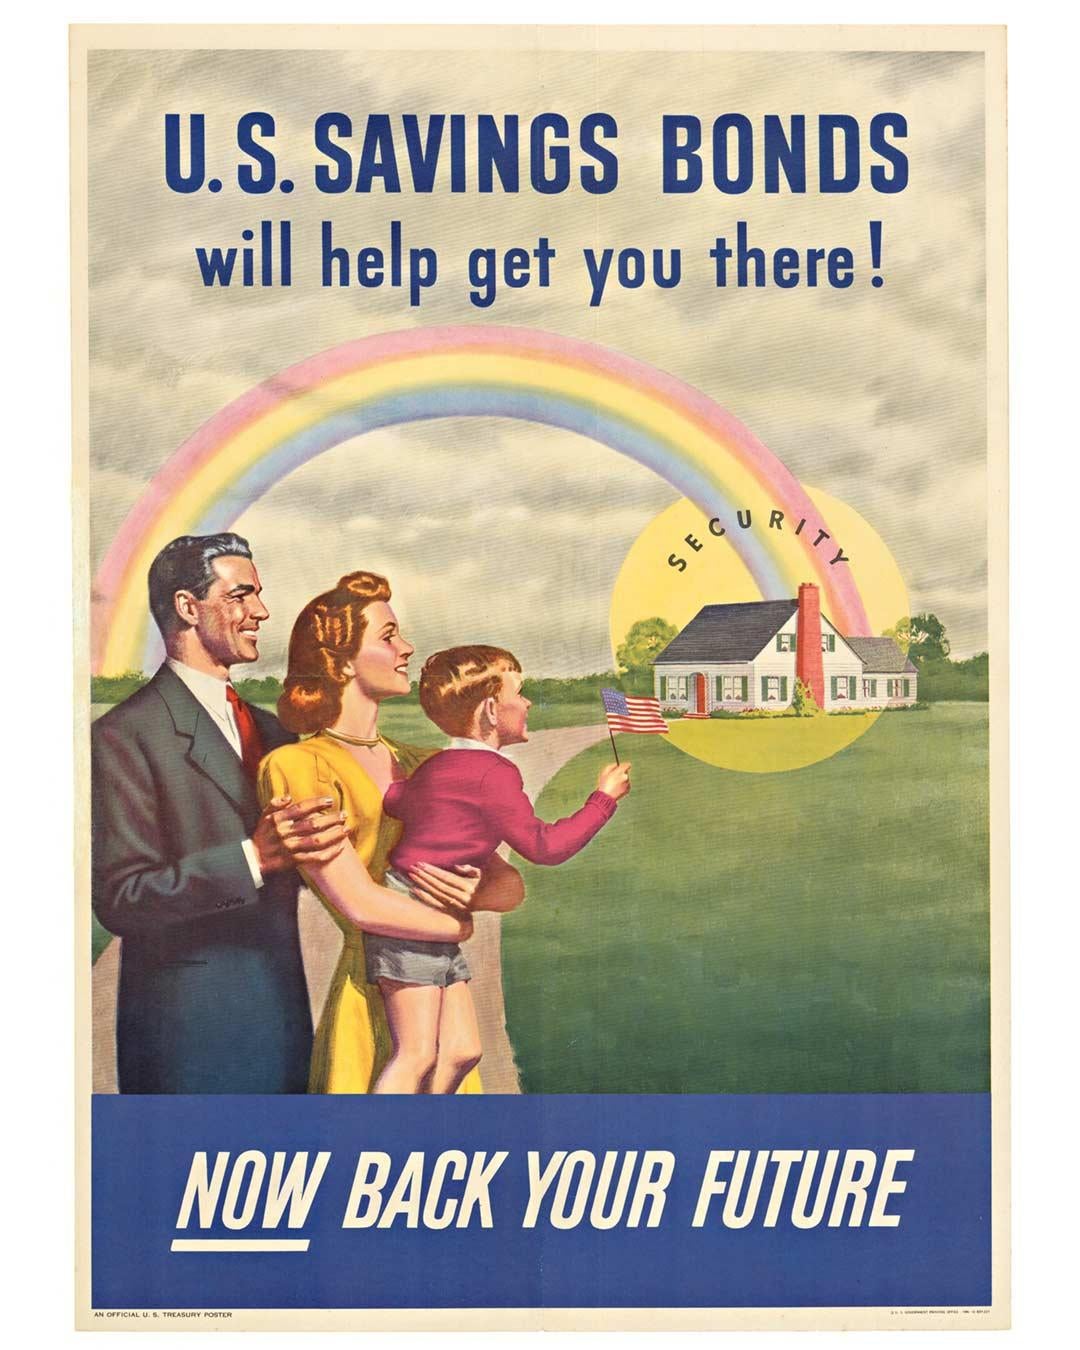 Original 'U. S. SAVINGS BONDS will help you get there!   NOW Back Your future.     Linen-backed, excellent condition.    Archival linen backed with original government-issued fold marks restored.   Rarely seen or available.

The image features a man